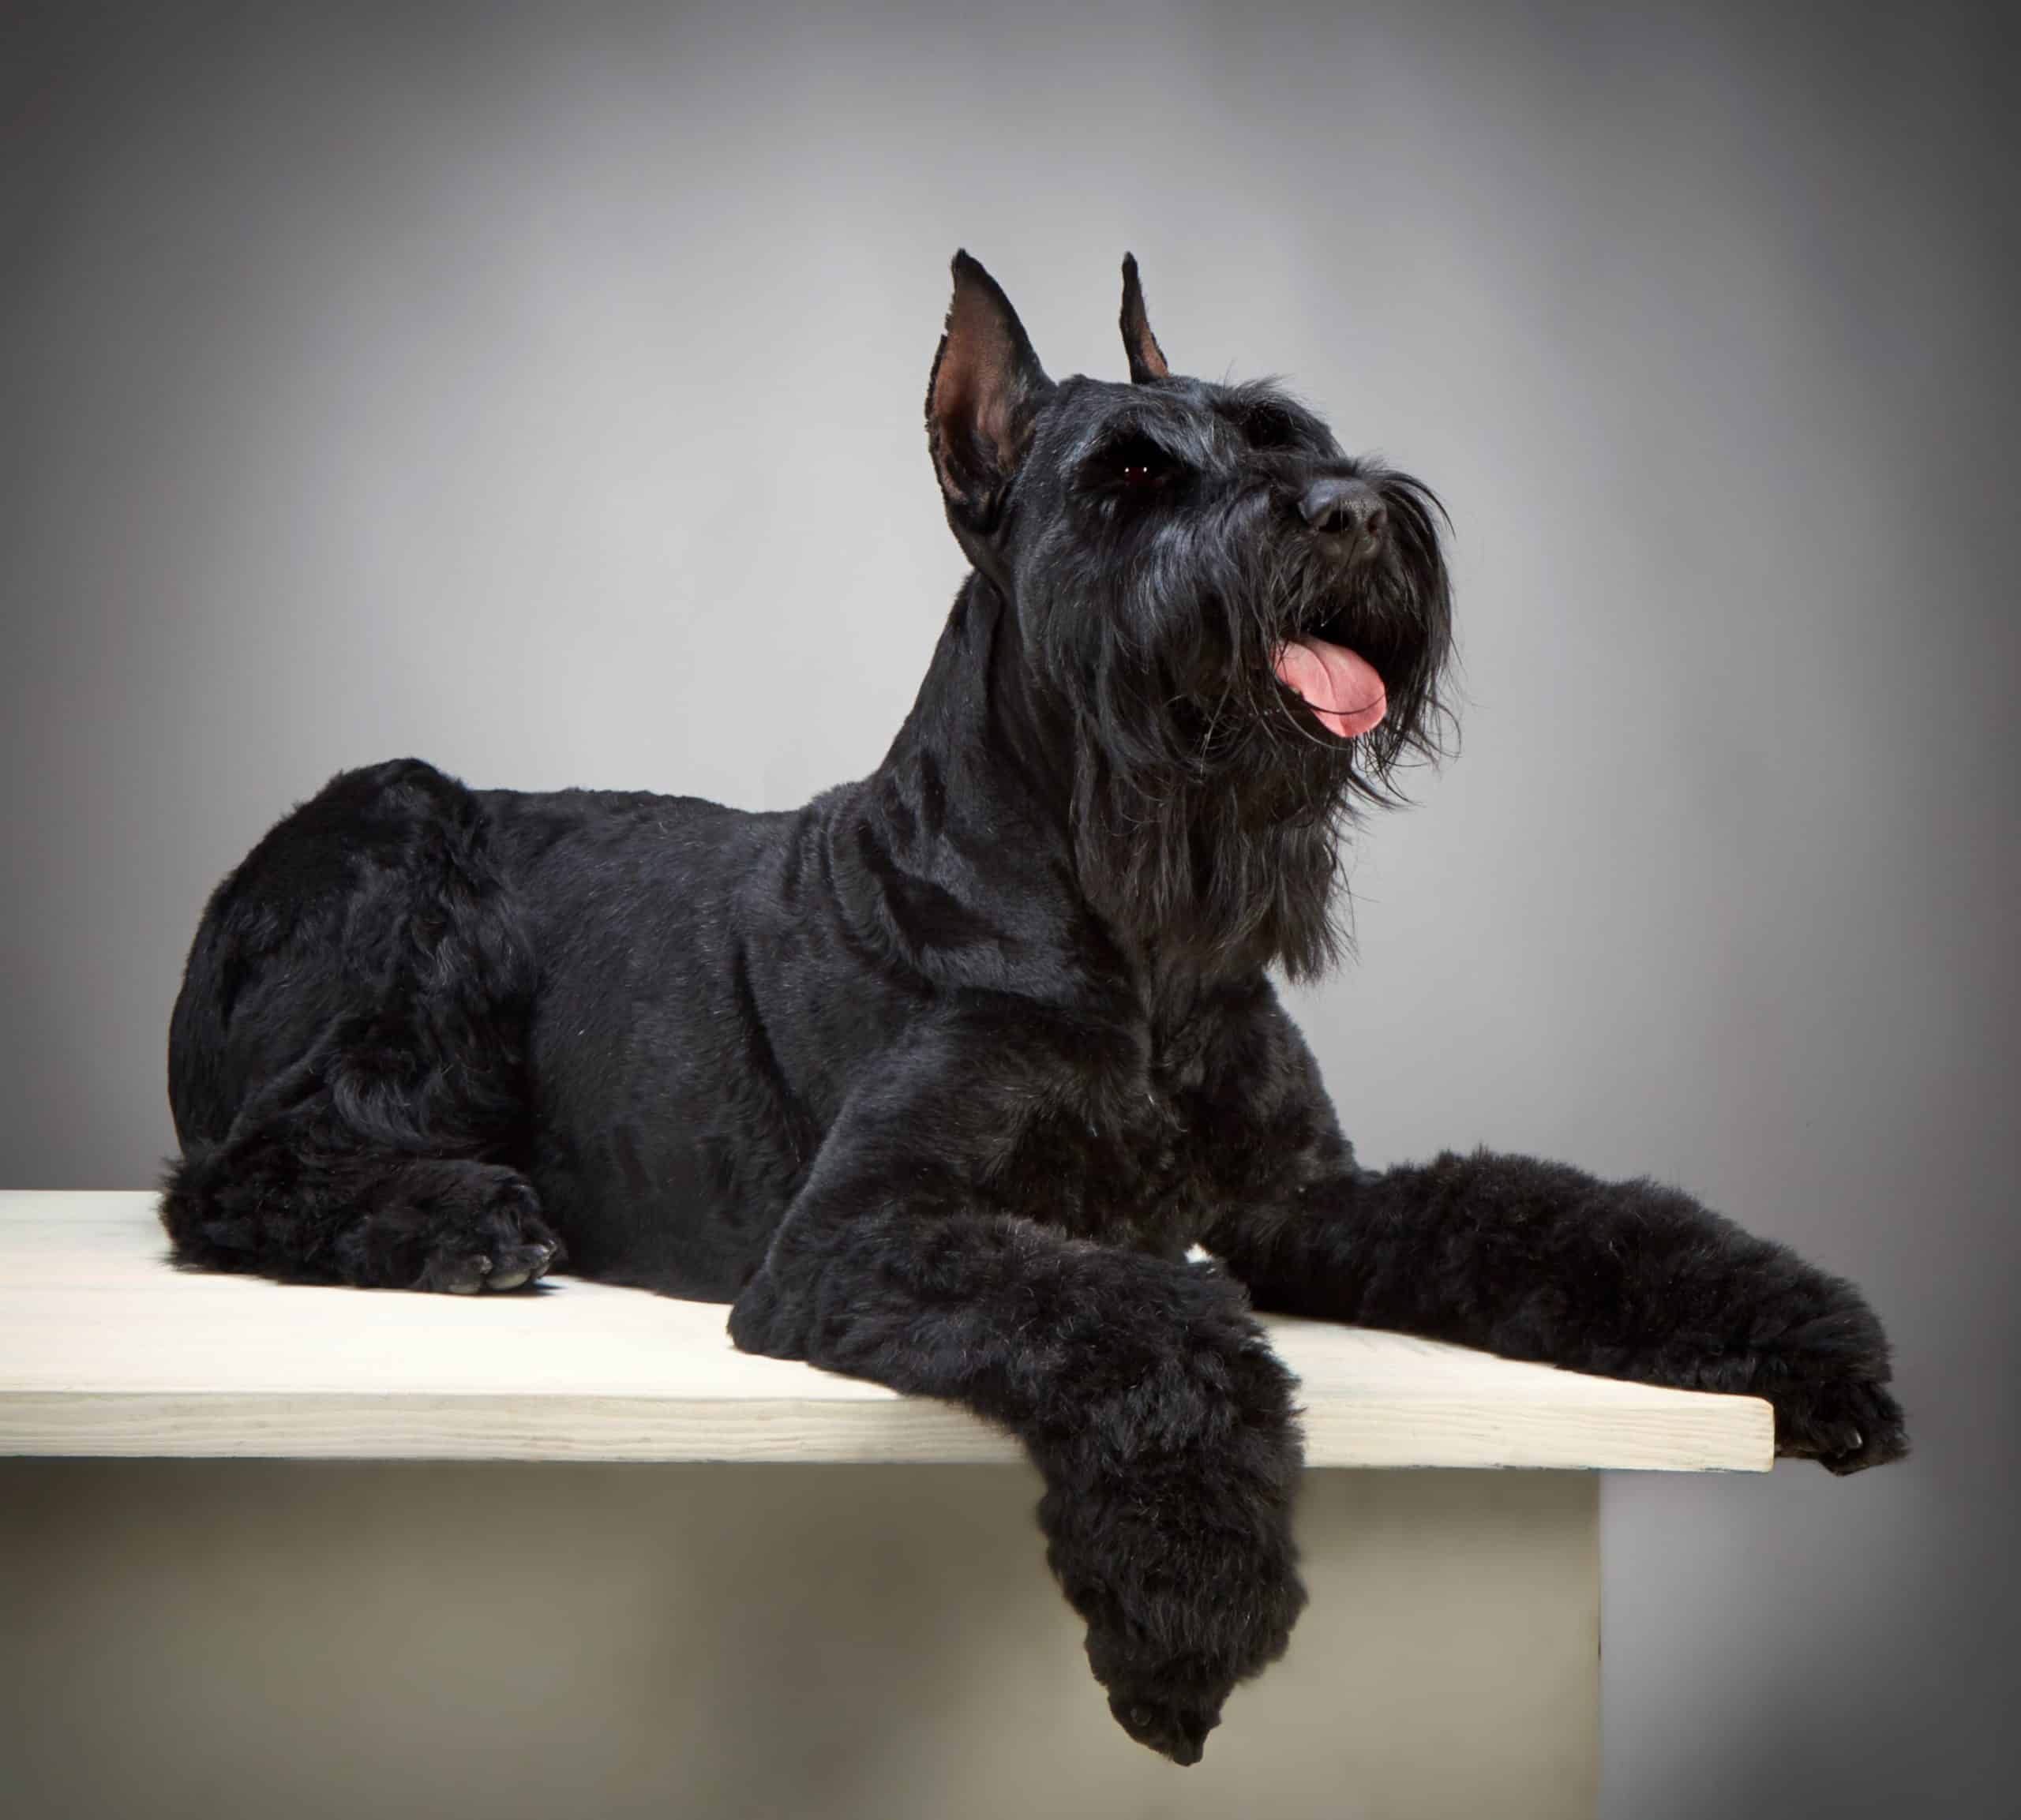 The giant or standard schnauzer is considered a hypoallergenic breed.